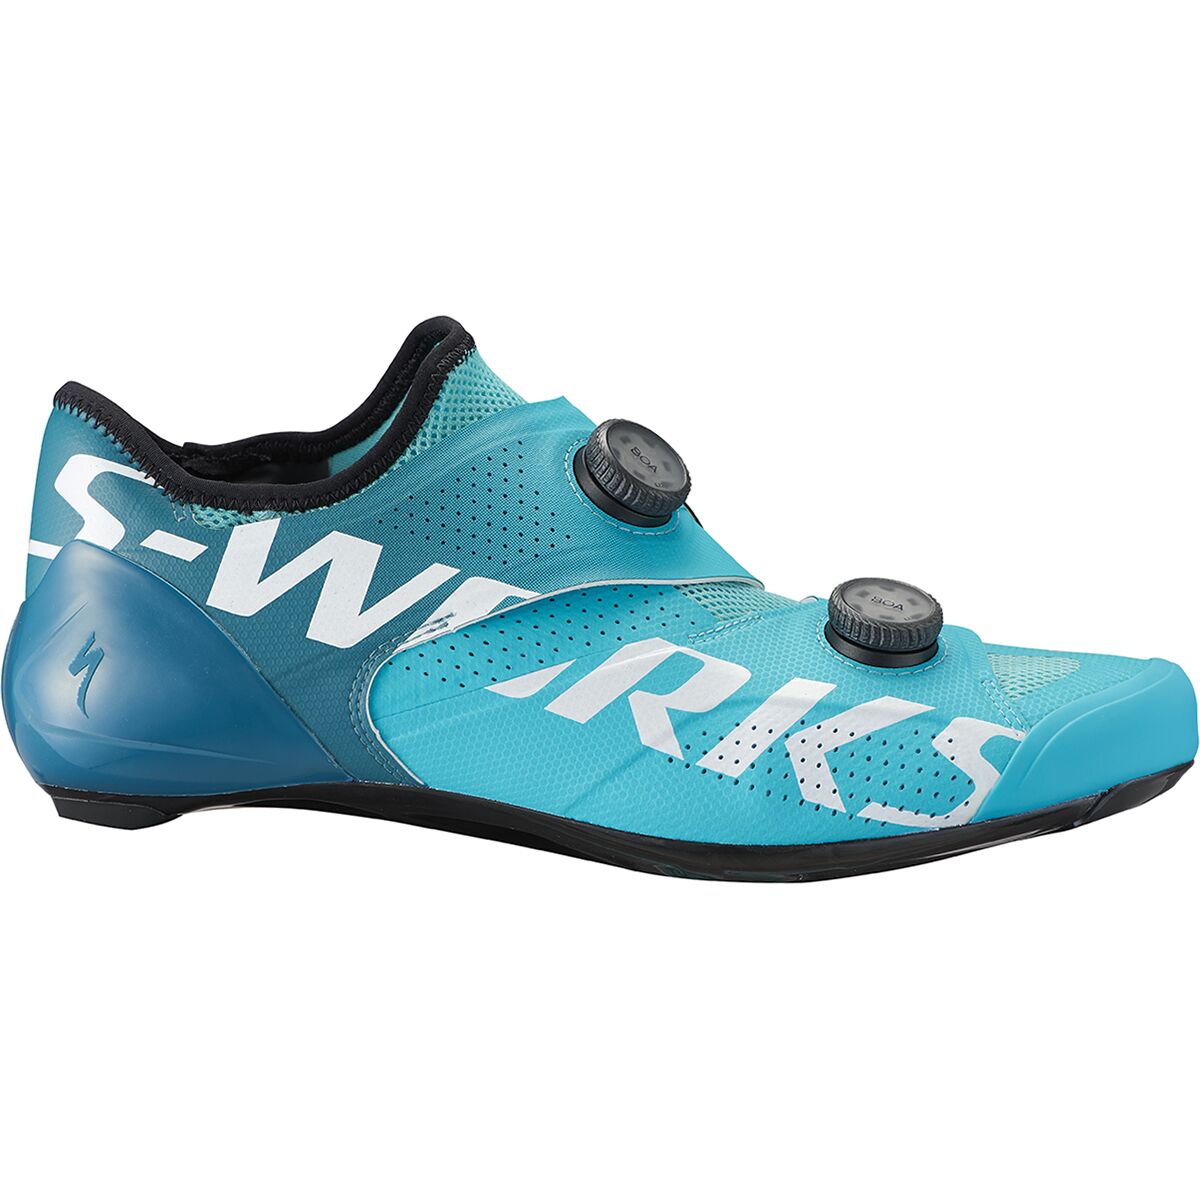 Specialized S-Works Ares Road Shoe - Bike